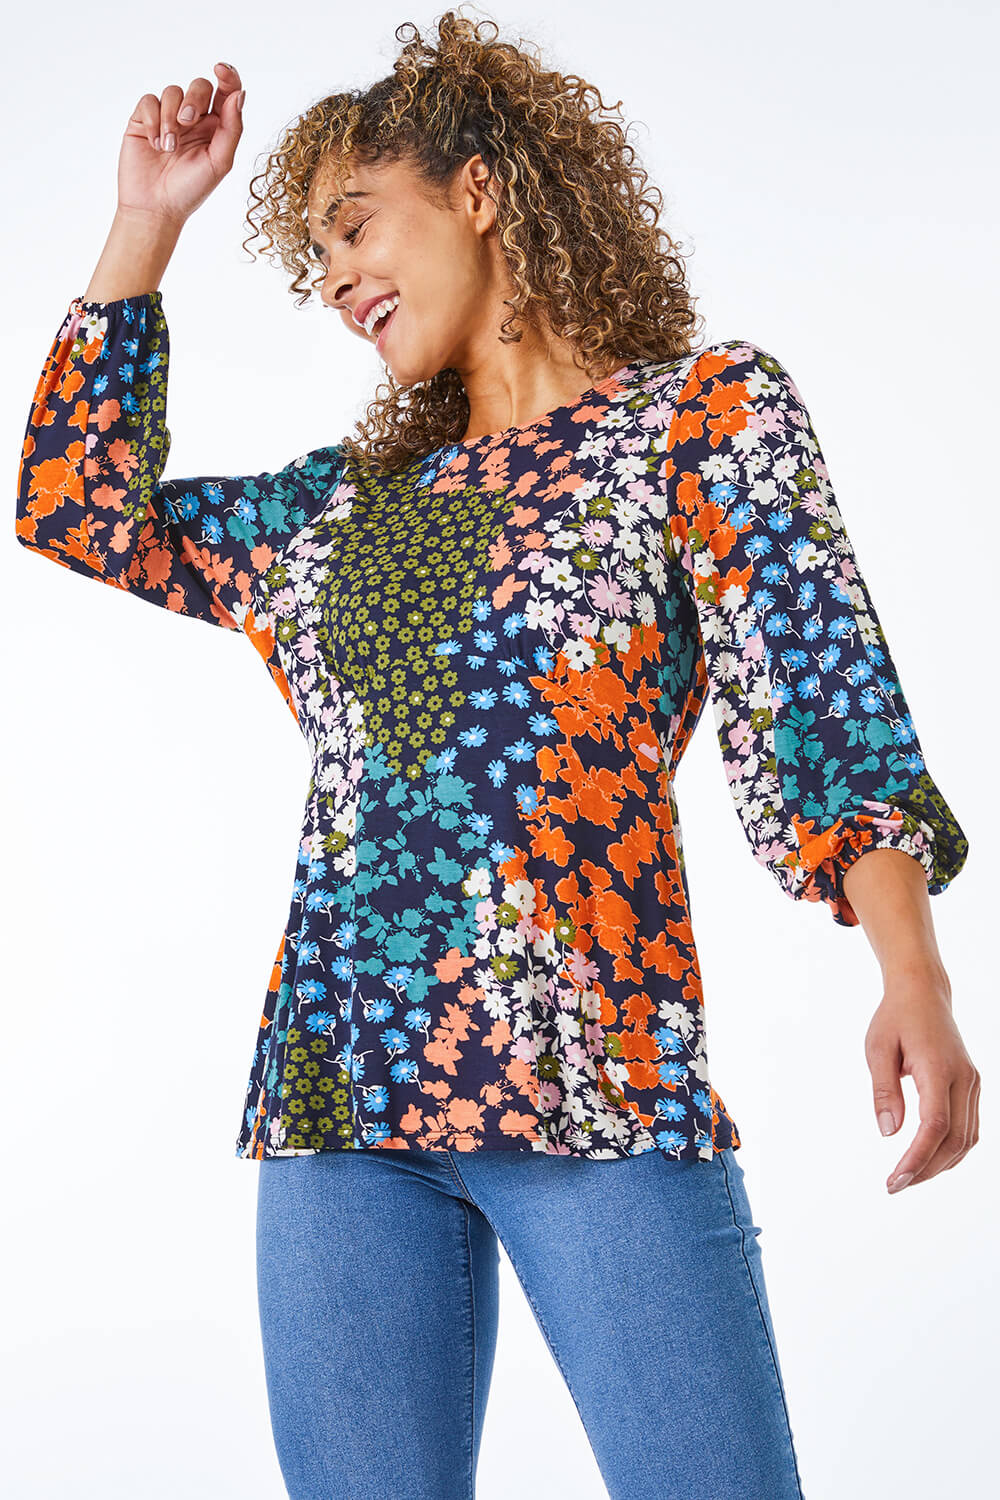 KHAKI Petite Floral Puff Sleeve Top, Image 2 of 5